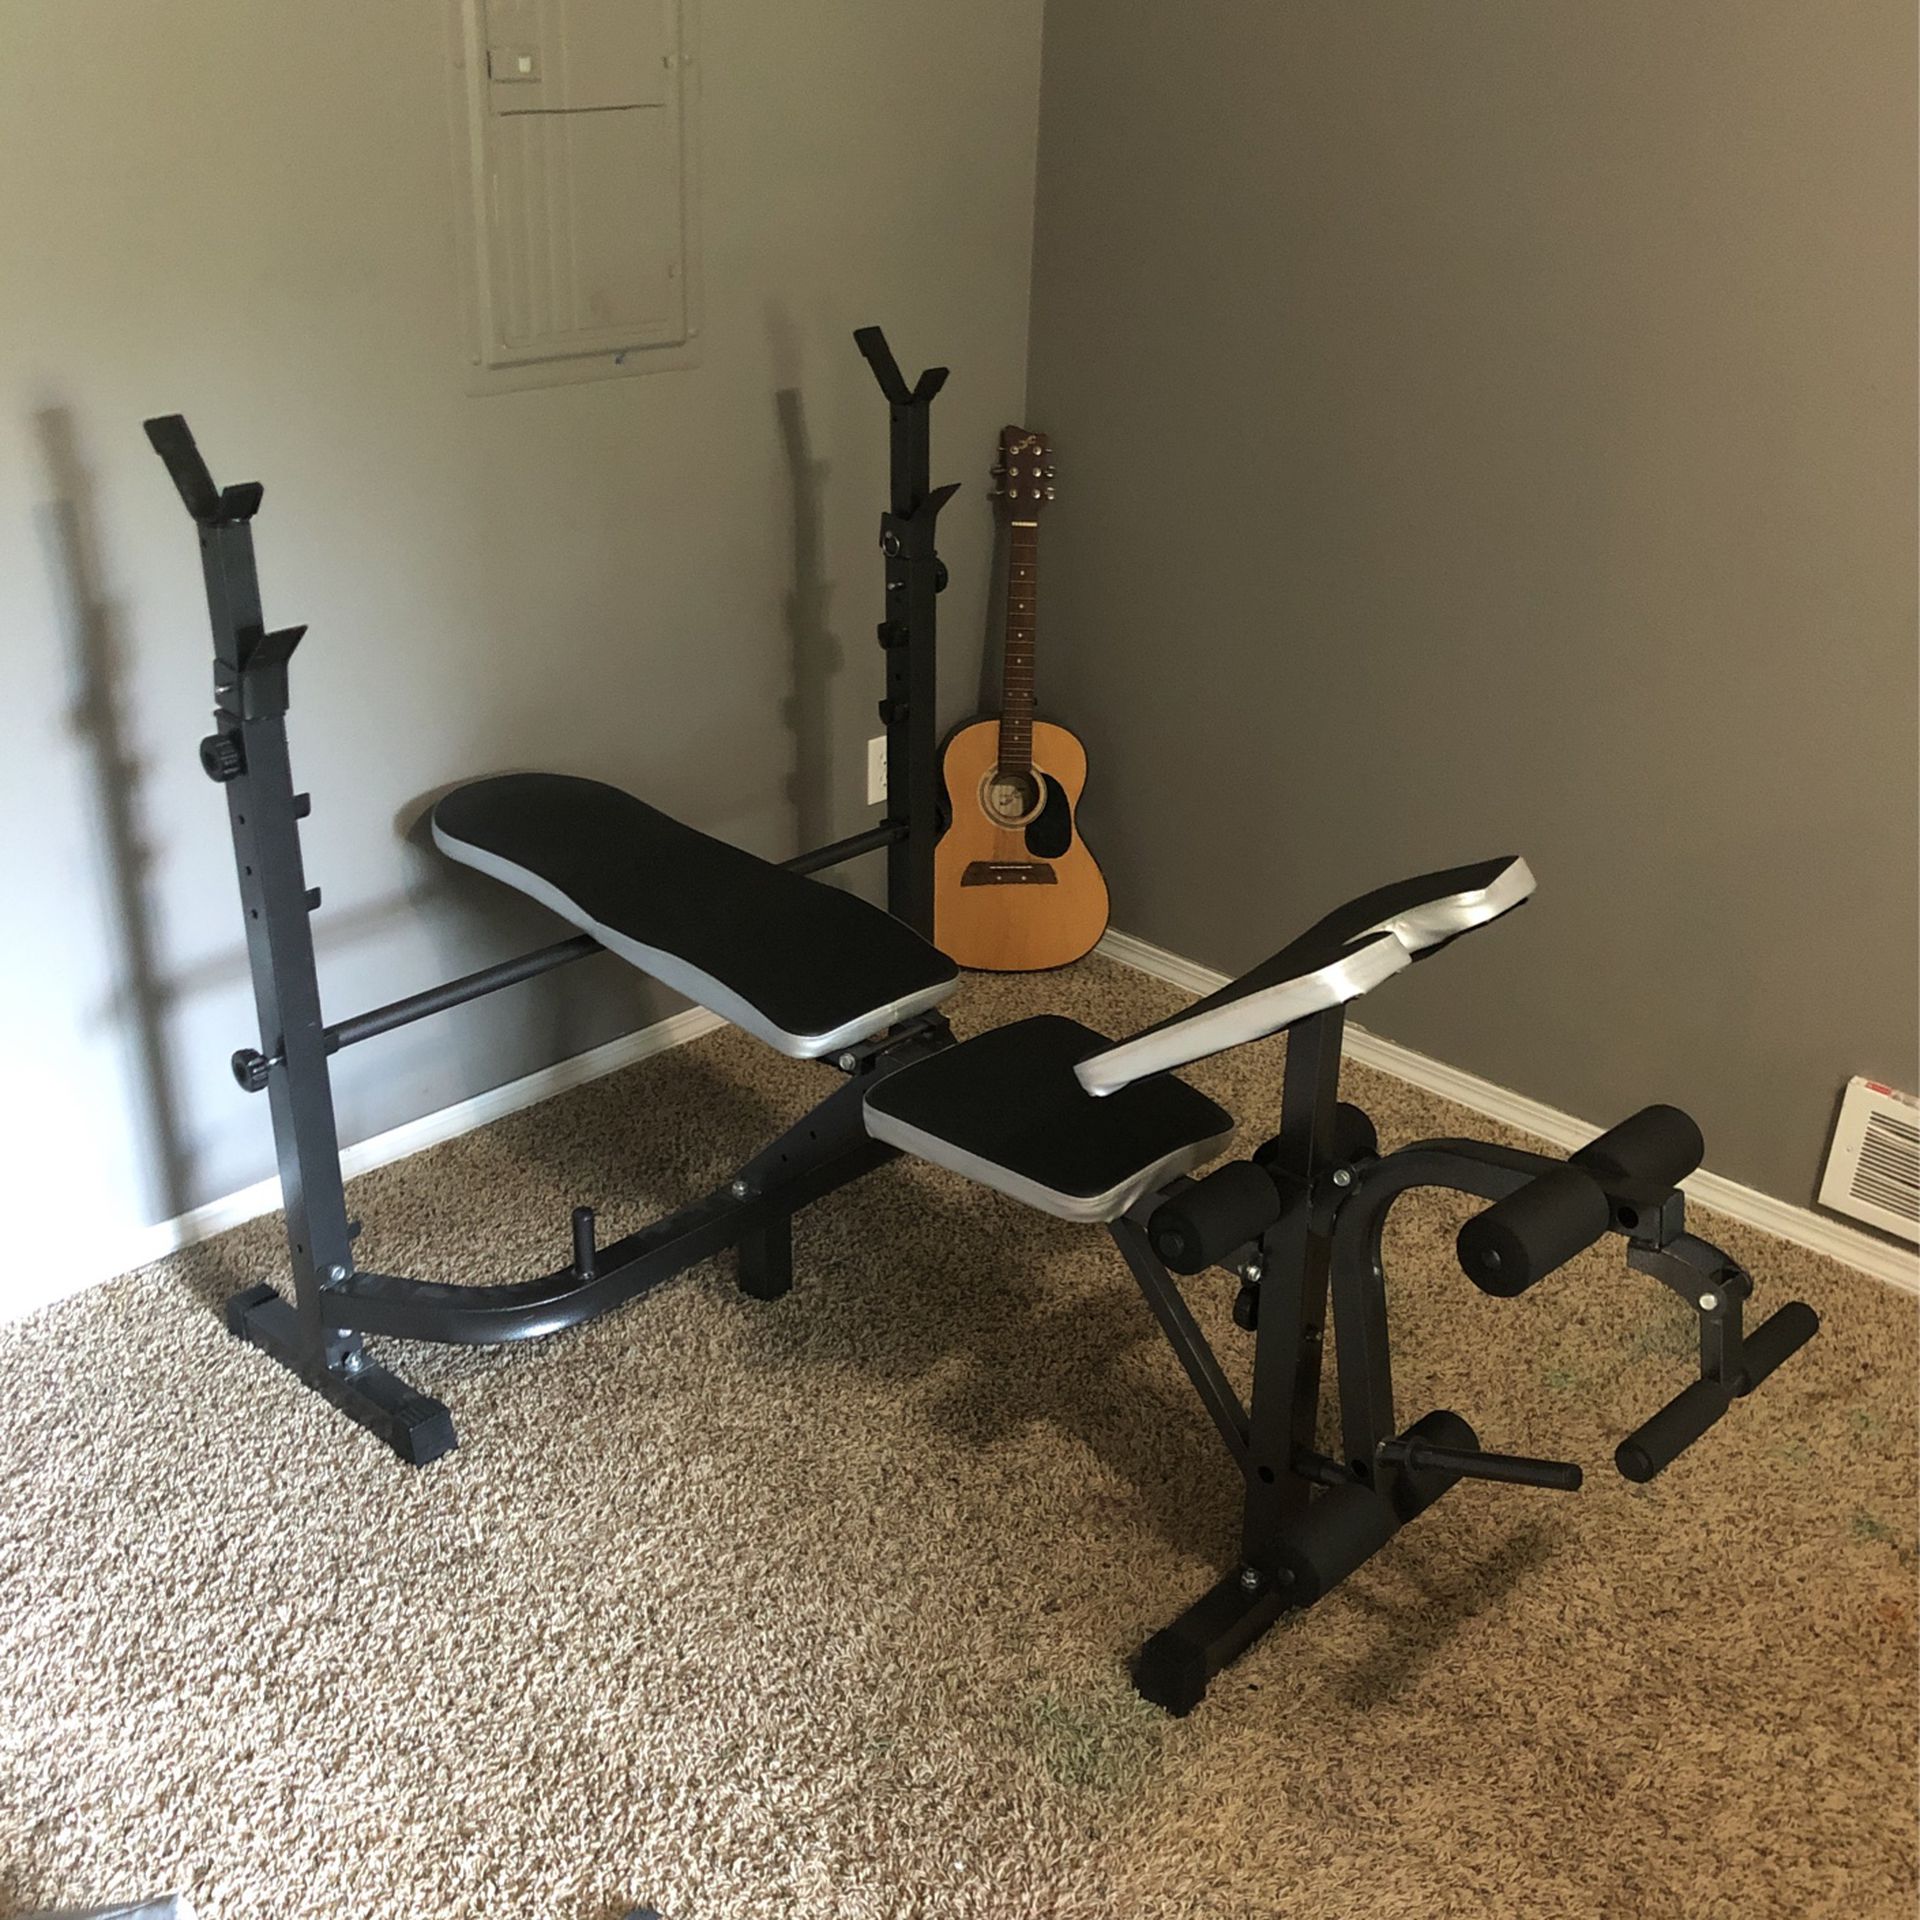 Bench press set w/ leg extension (no weight or bar included)